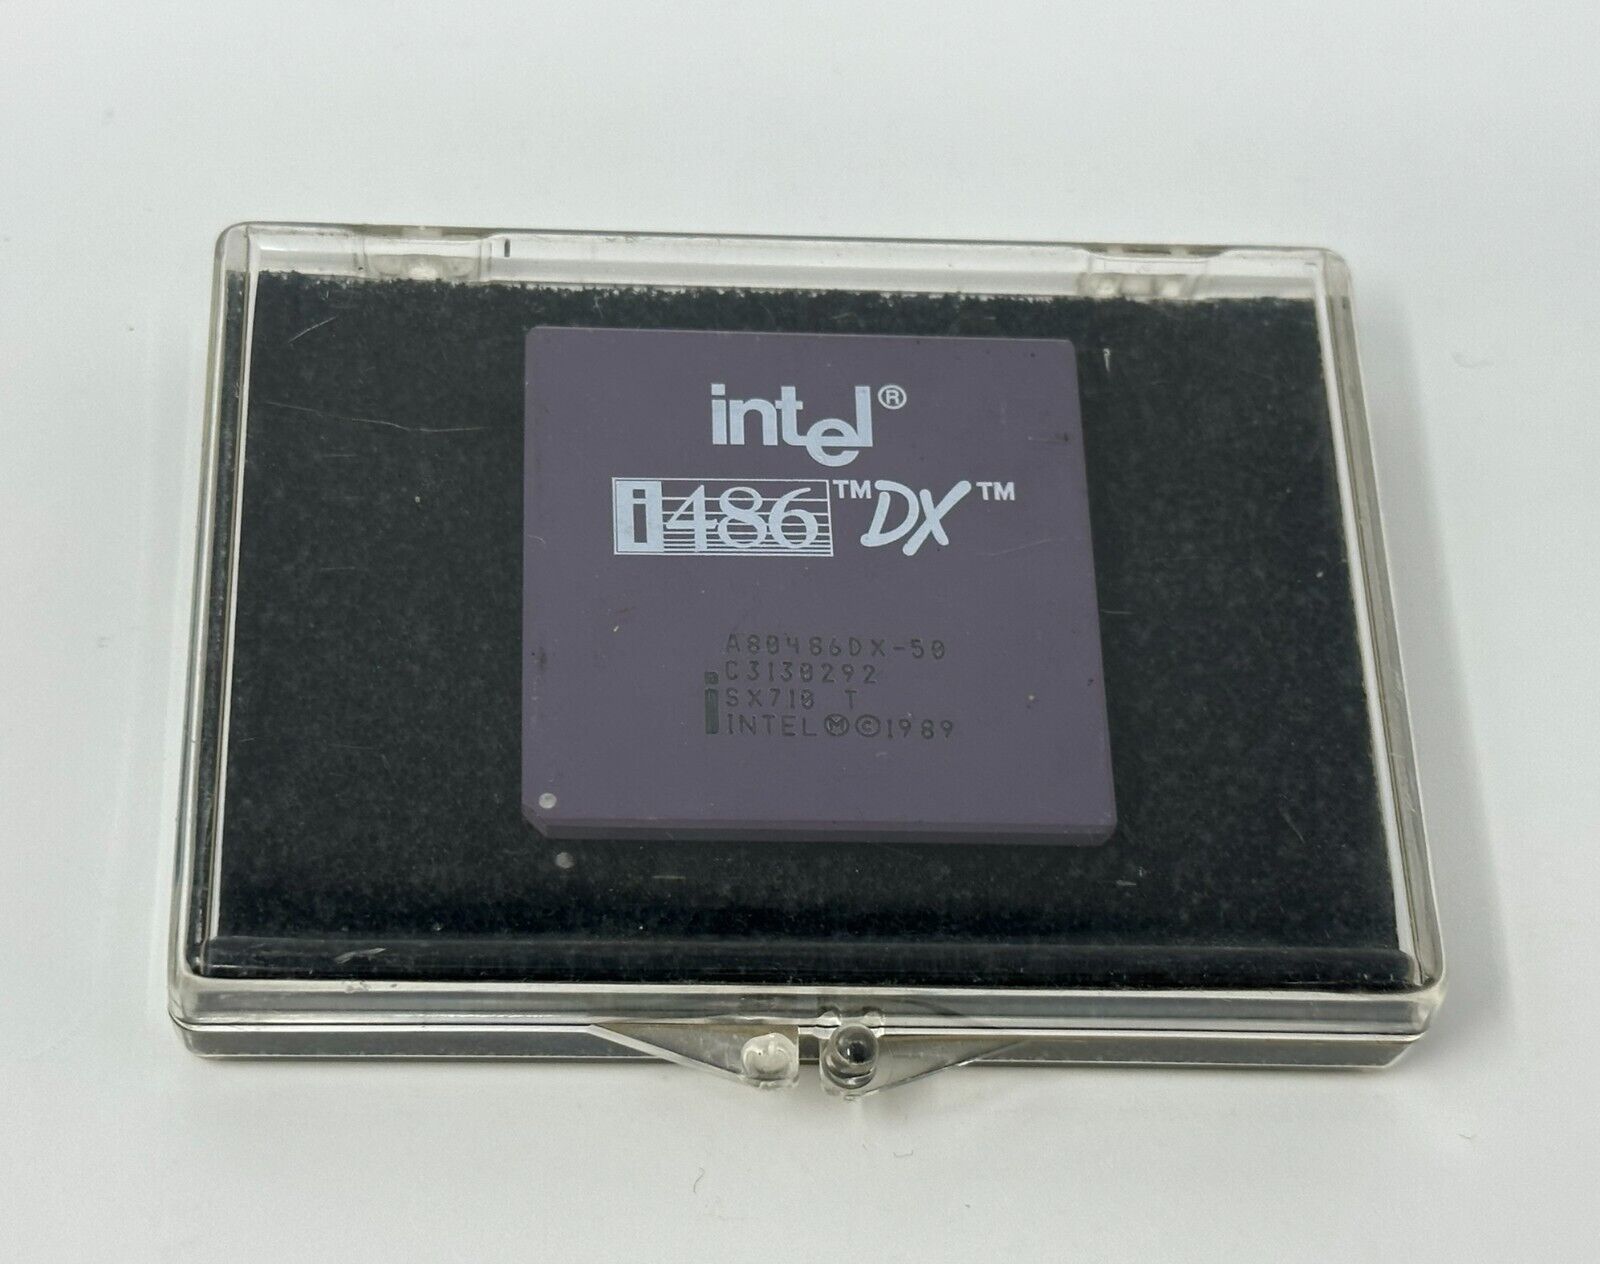 Intel i486DX A80486DX-50 SX710  i486DX-50 MHZ - Rare With Case - Very Nice